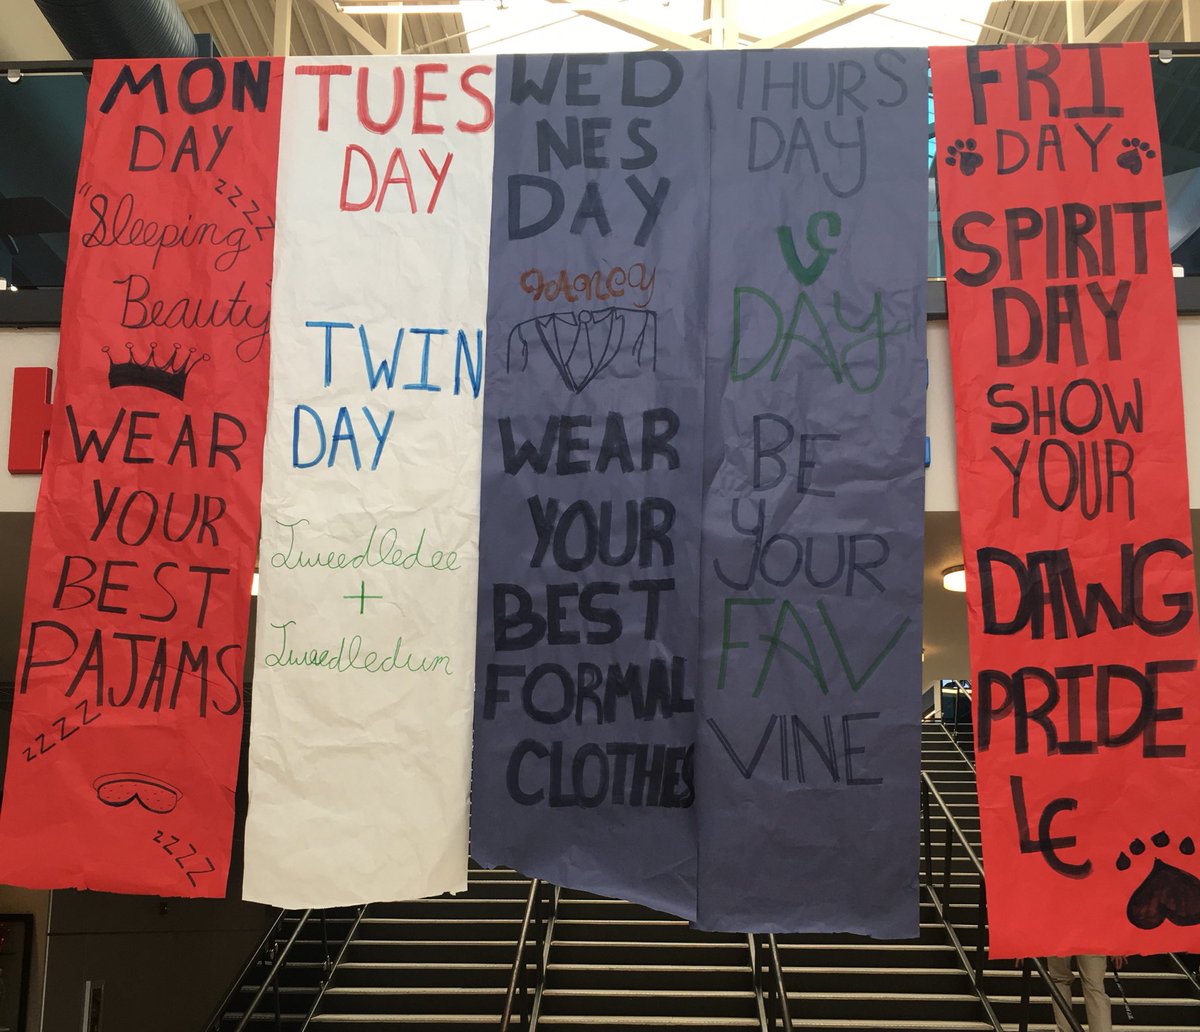 Alright Bulldawgs, its homecoming week! Let’s get the week started tomorrow by wearing your best pajamas. #showyourspirit #hoco2018 #beatthemonarchs